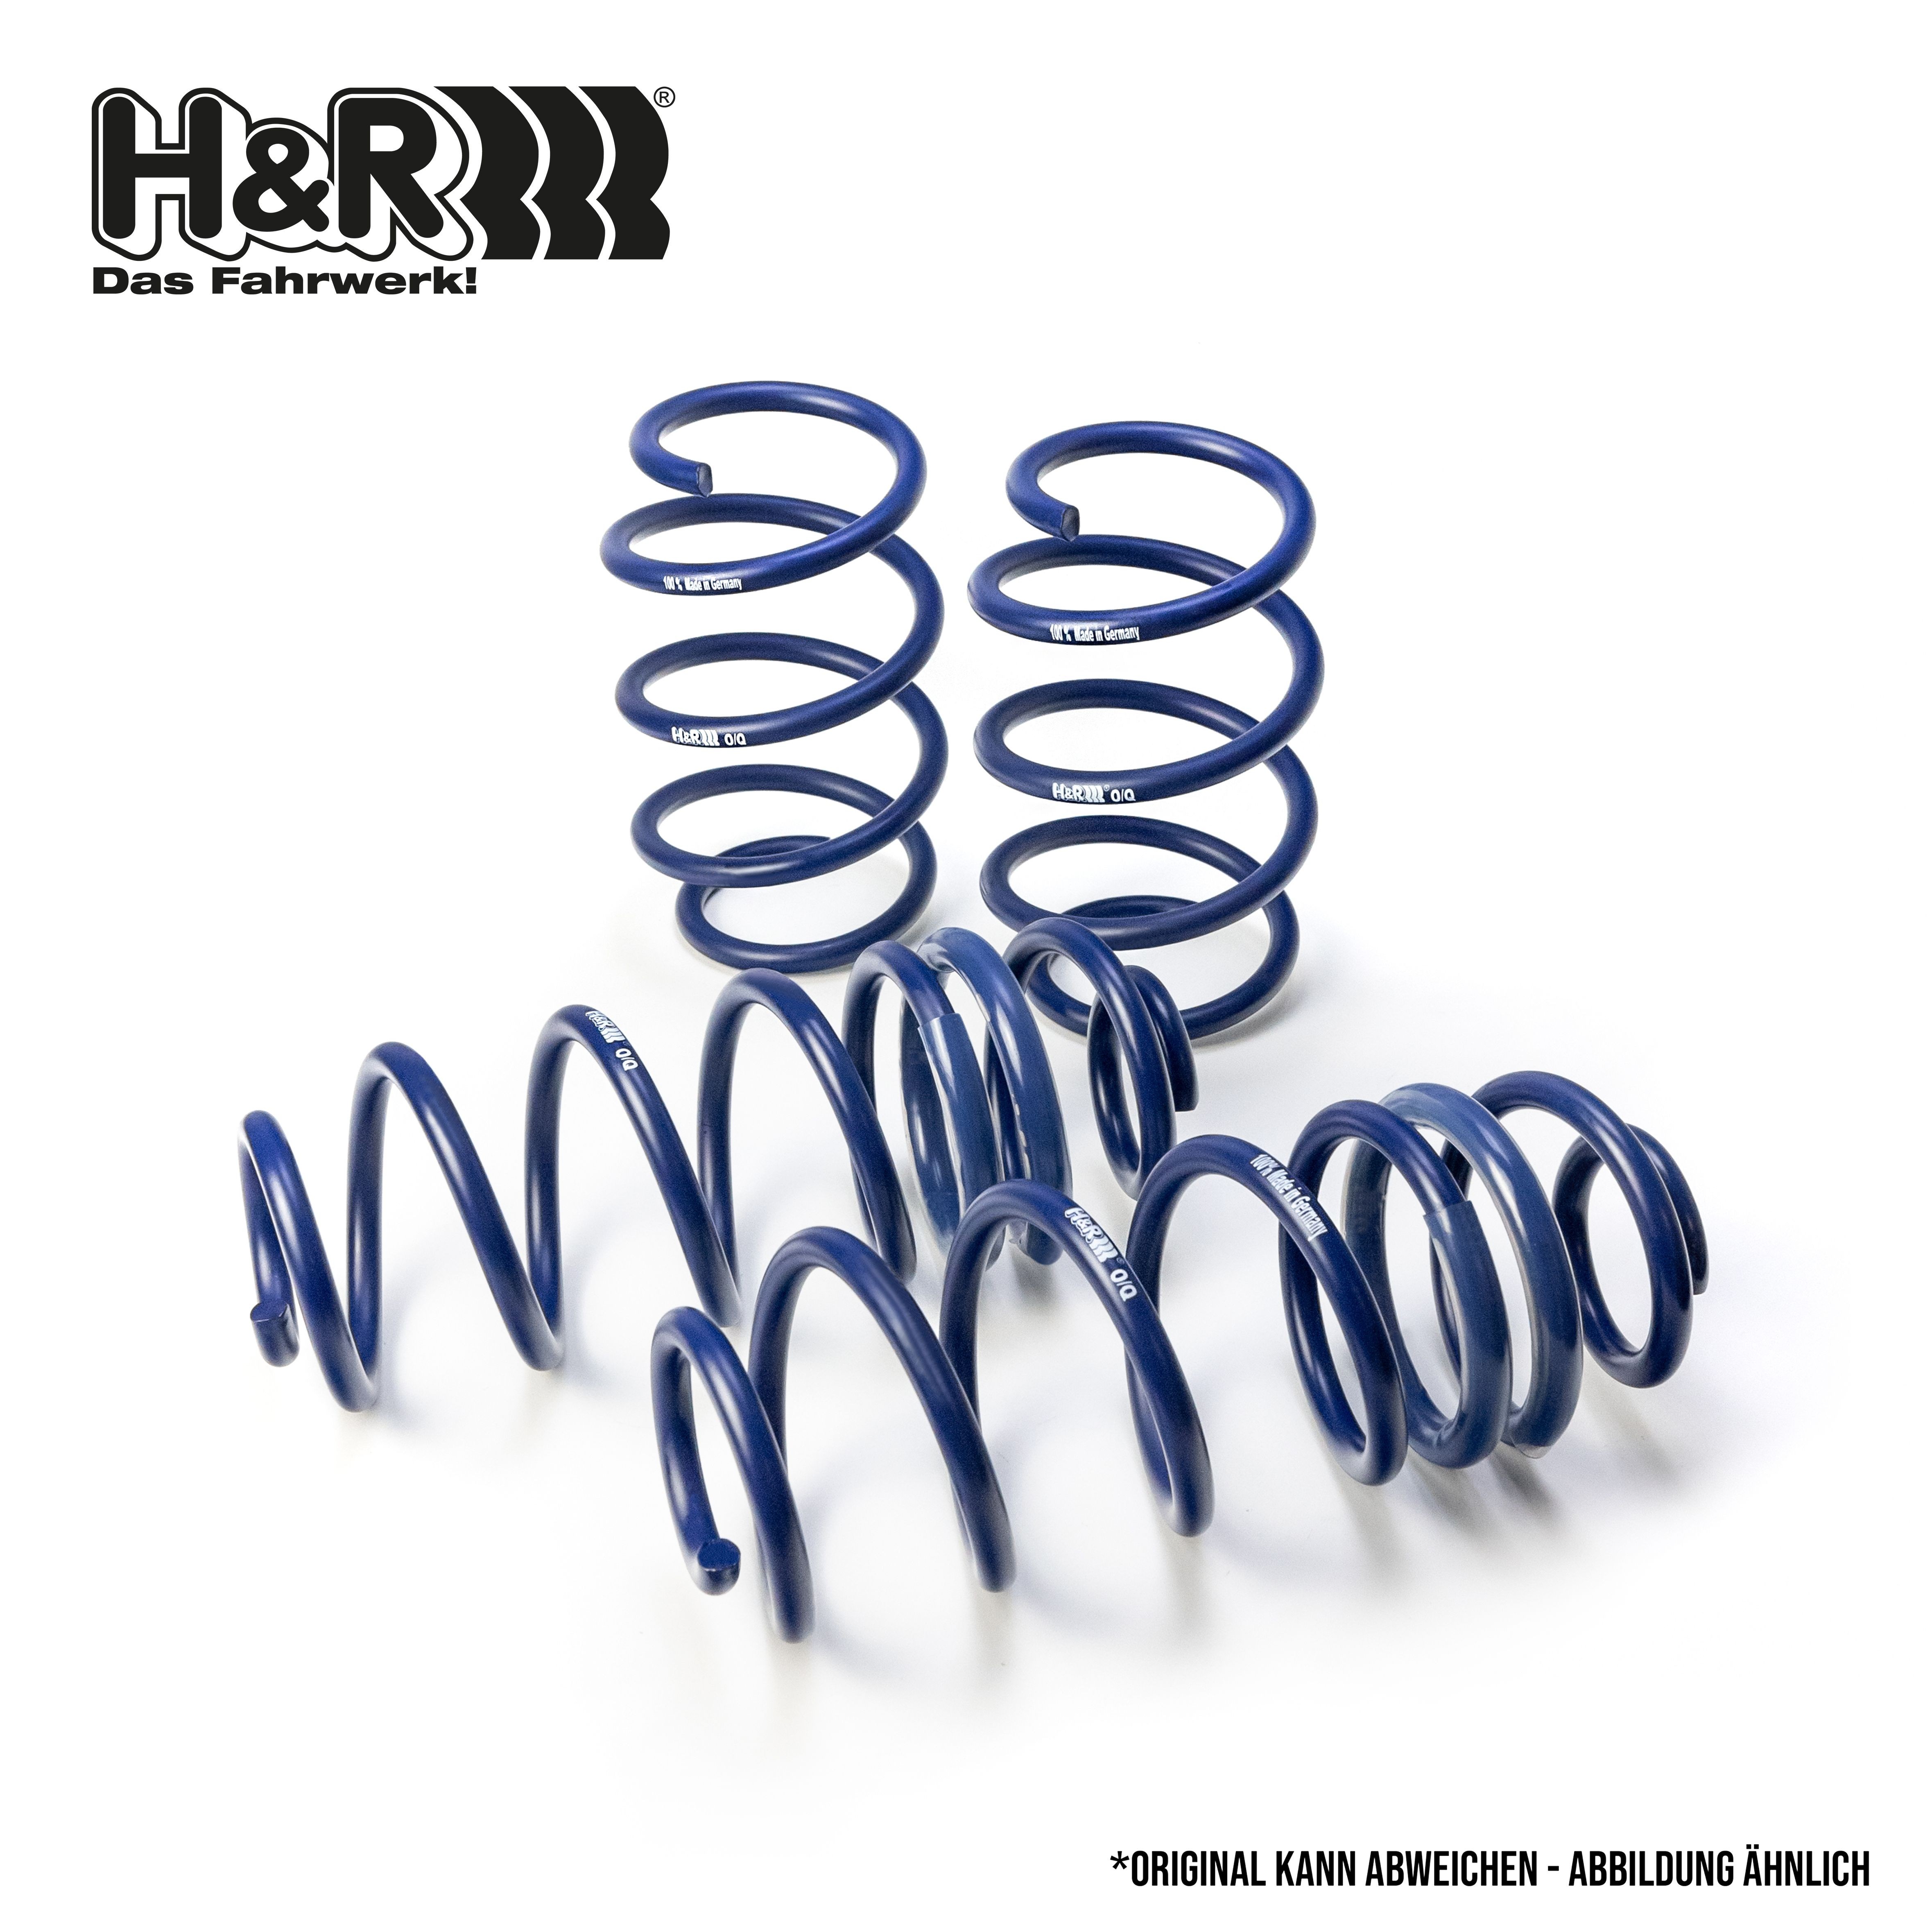 289591 Spring set Performance Lowering Springs H&R 28959-1 review and test